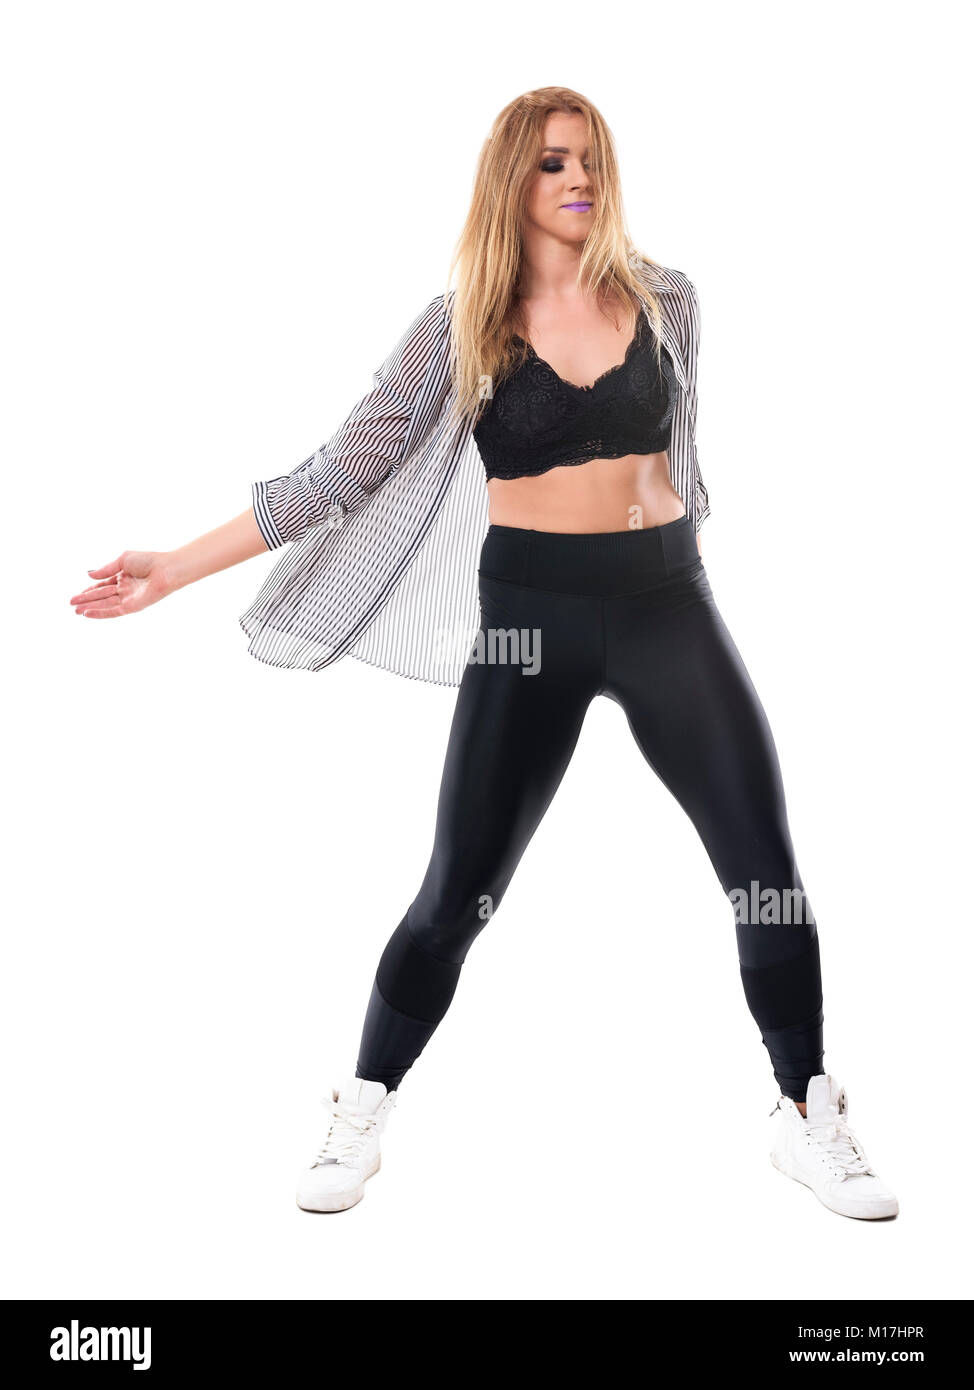 Active young sporty aerobics jazz dance instructor dancing and moving arms. Full body length portrait isolated on white studio background. Stock Photo